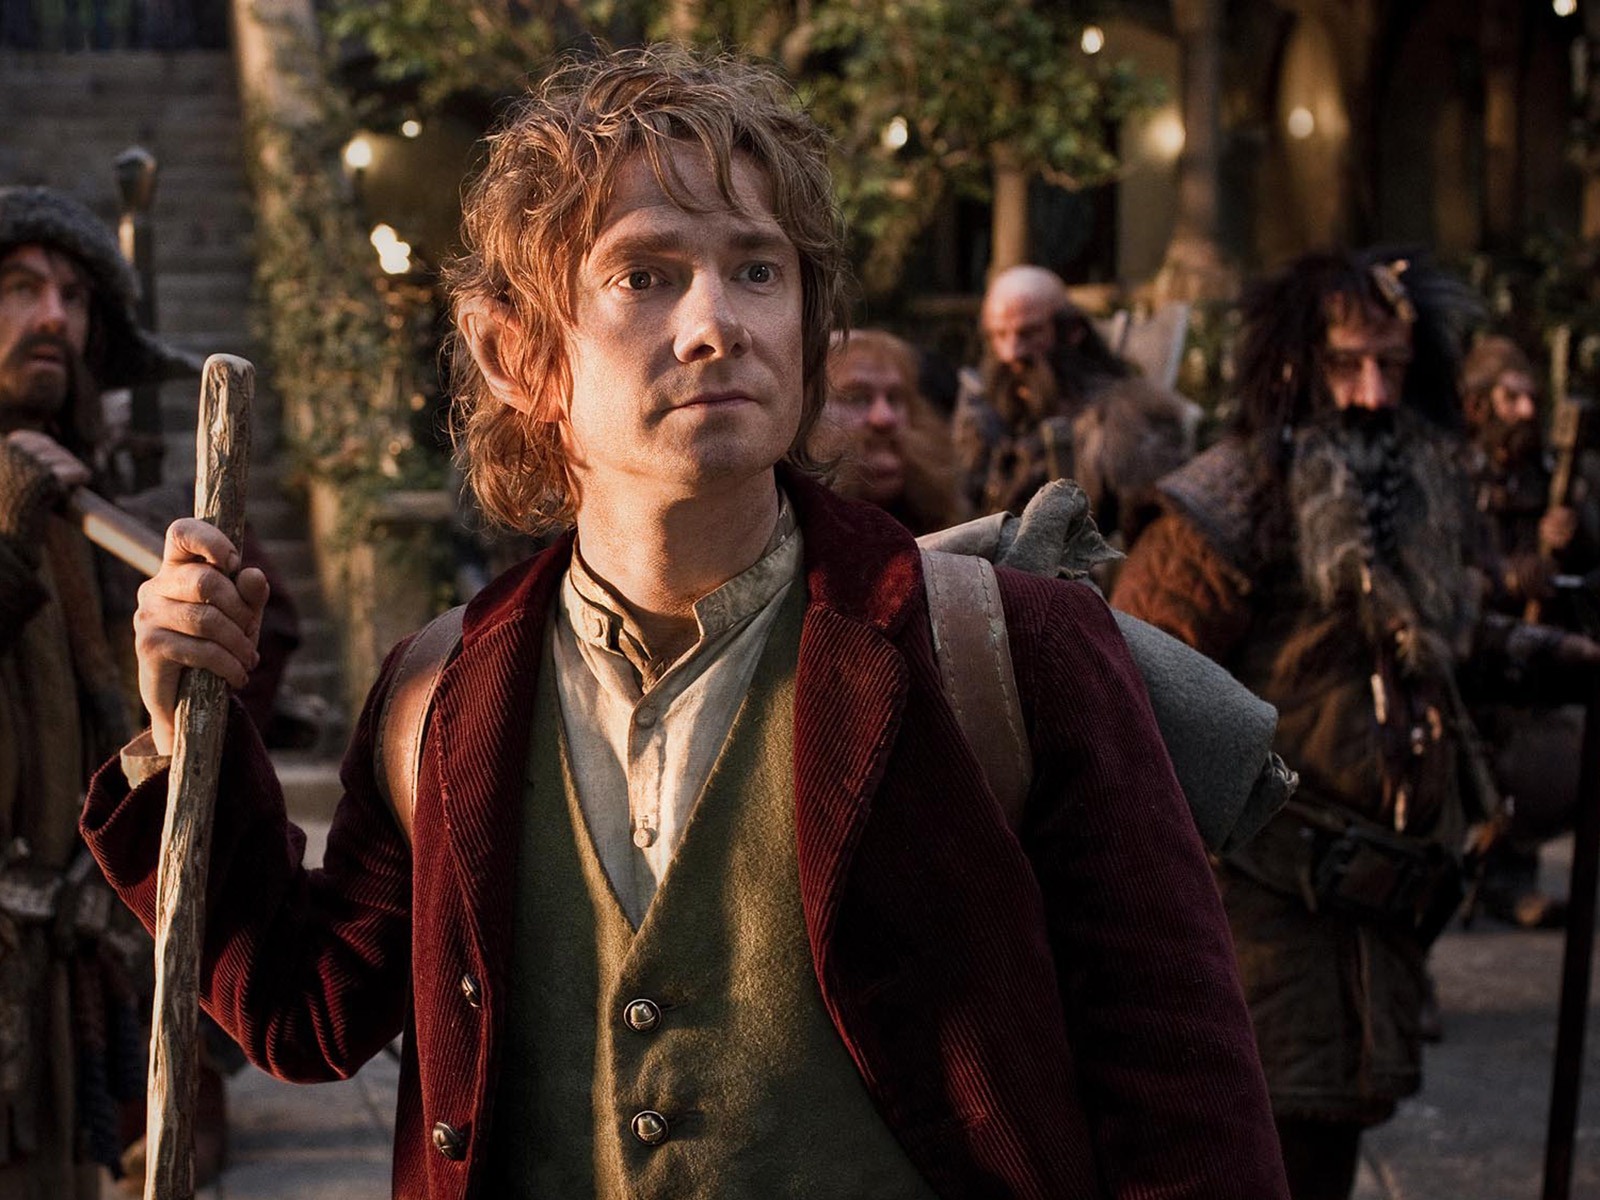 The Hobbit: An Unexpected Journey HD wallpapers #3 - 1600x1200